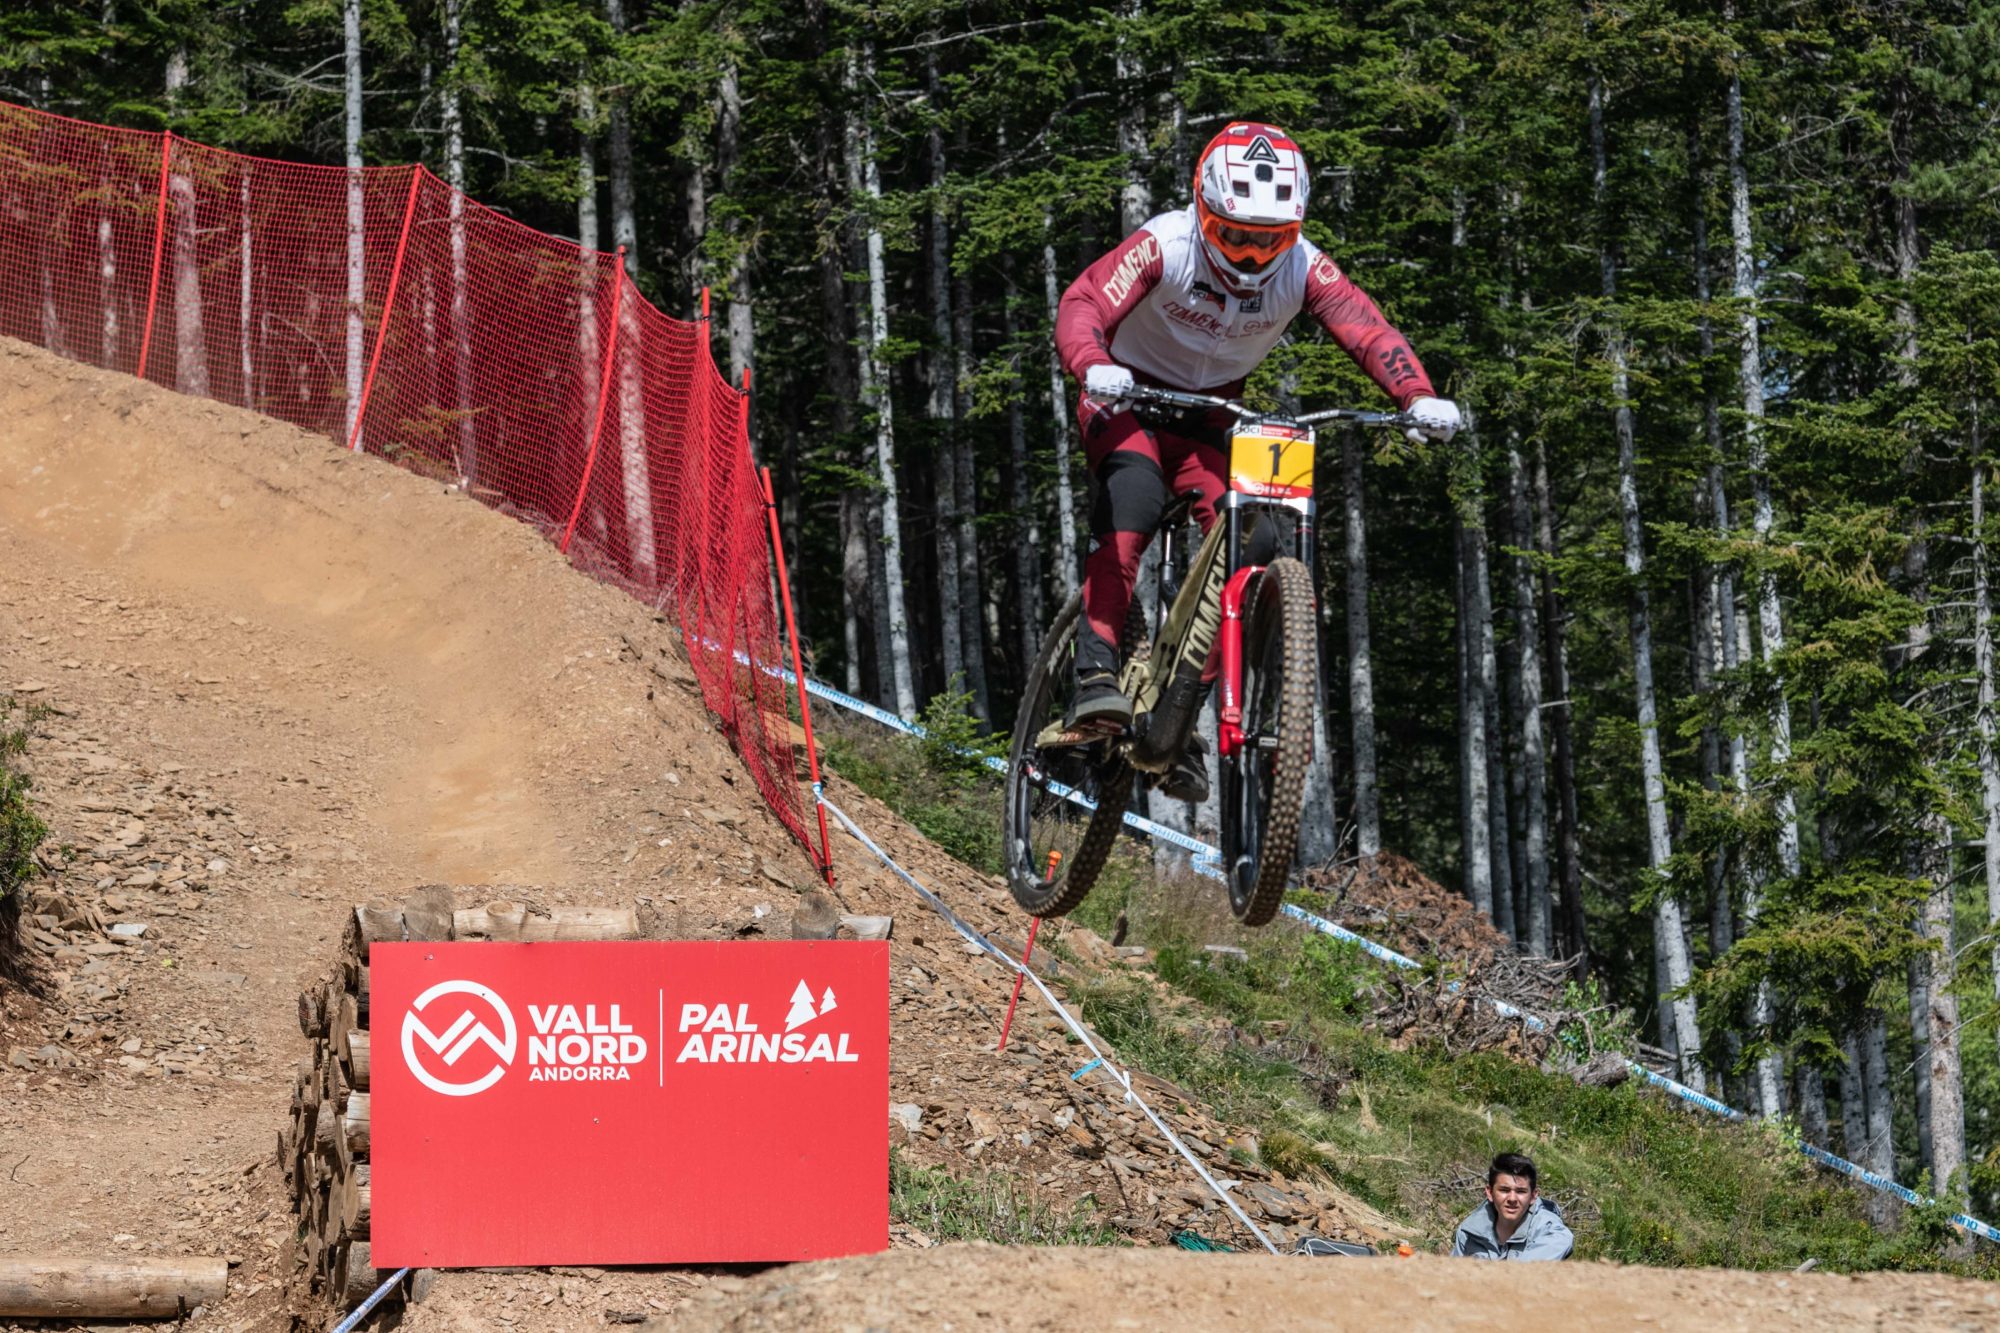 World Cup Vallnord Pal Arinsal 2018. Photo: Vallnord Pal Arinsal. Vallnord Pal Arinsal is ranked as one of the top 9 bike parks in the world by Red Bull.